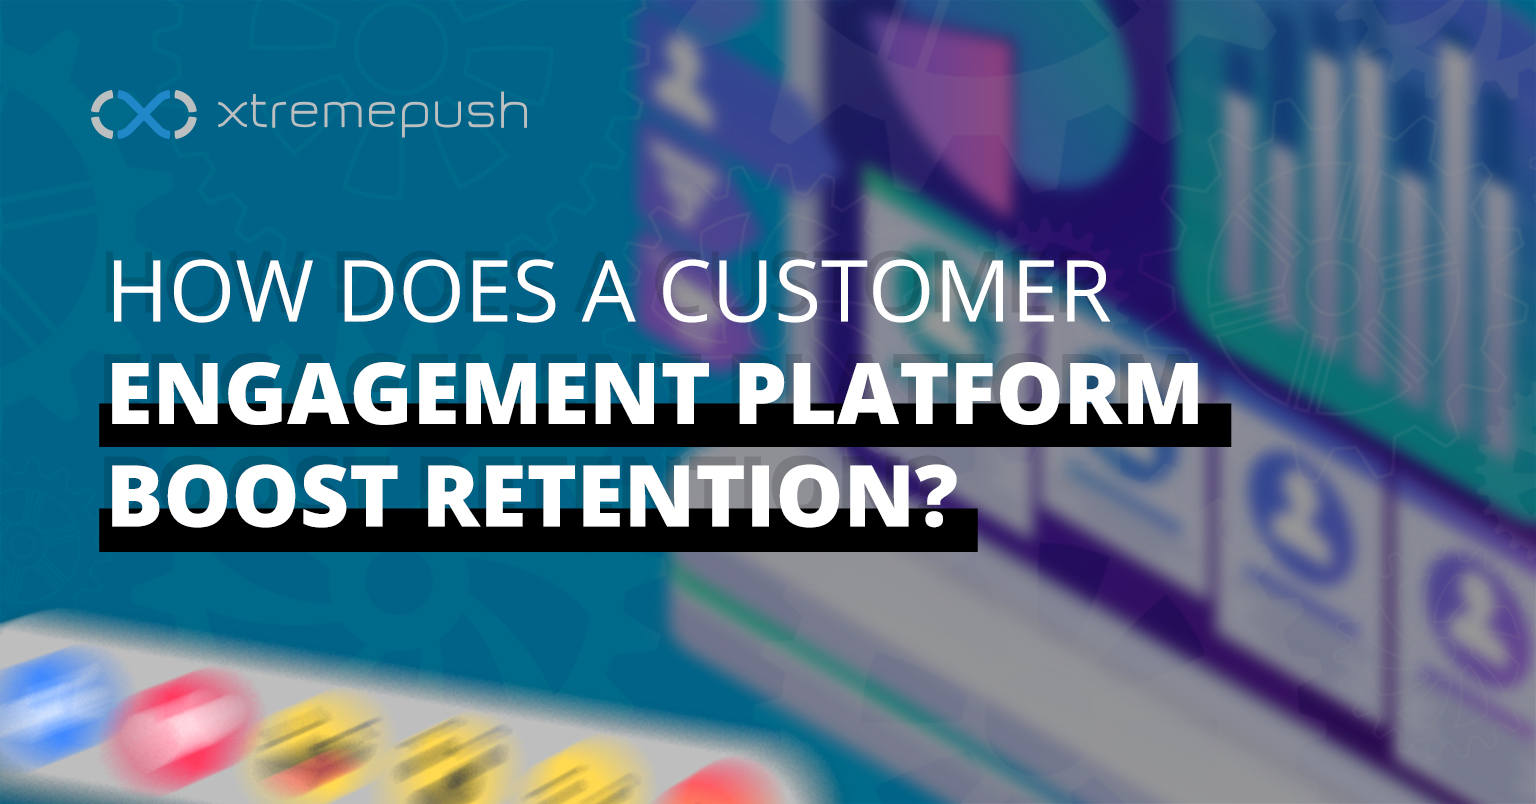 How Does a Customer Engagement Platform Boost Retention?